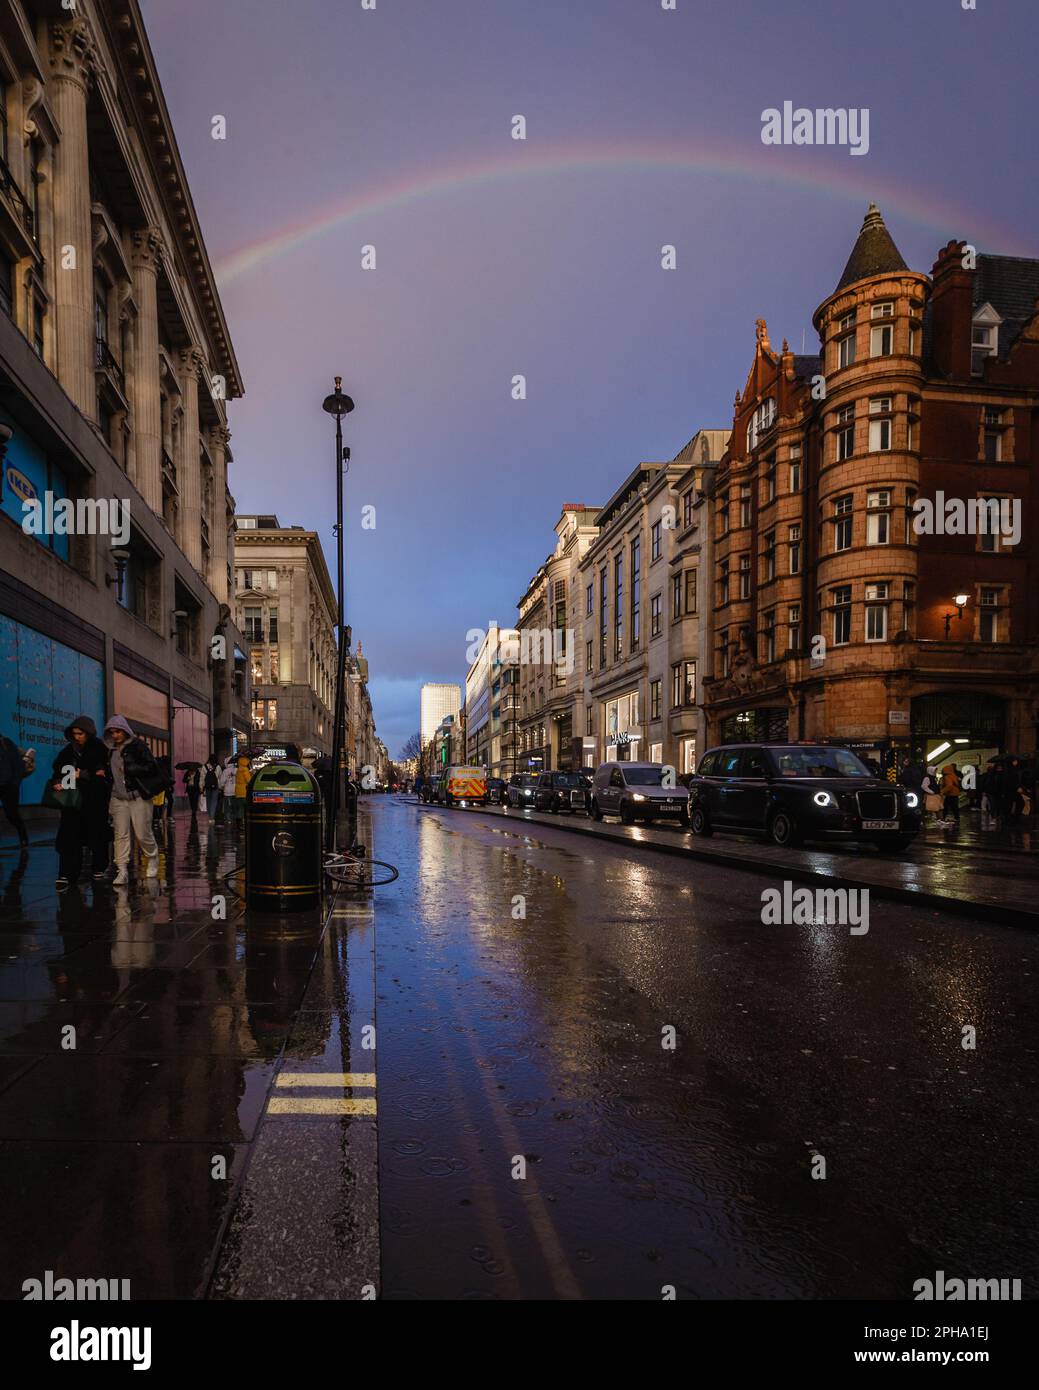 A rainbow appears over central London after a downpour. Stock Photo